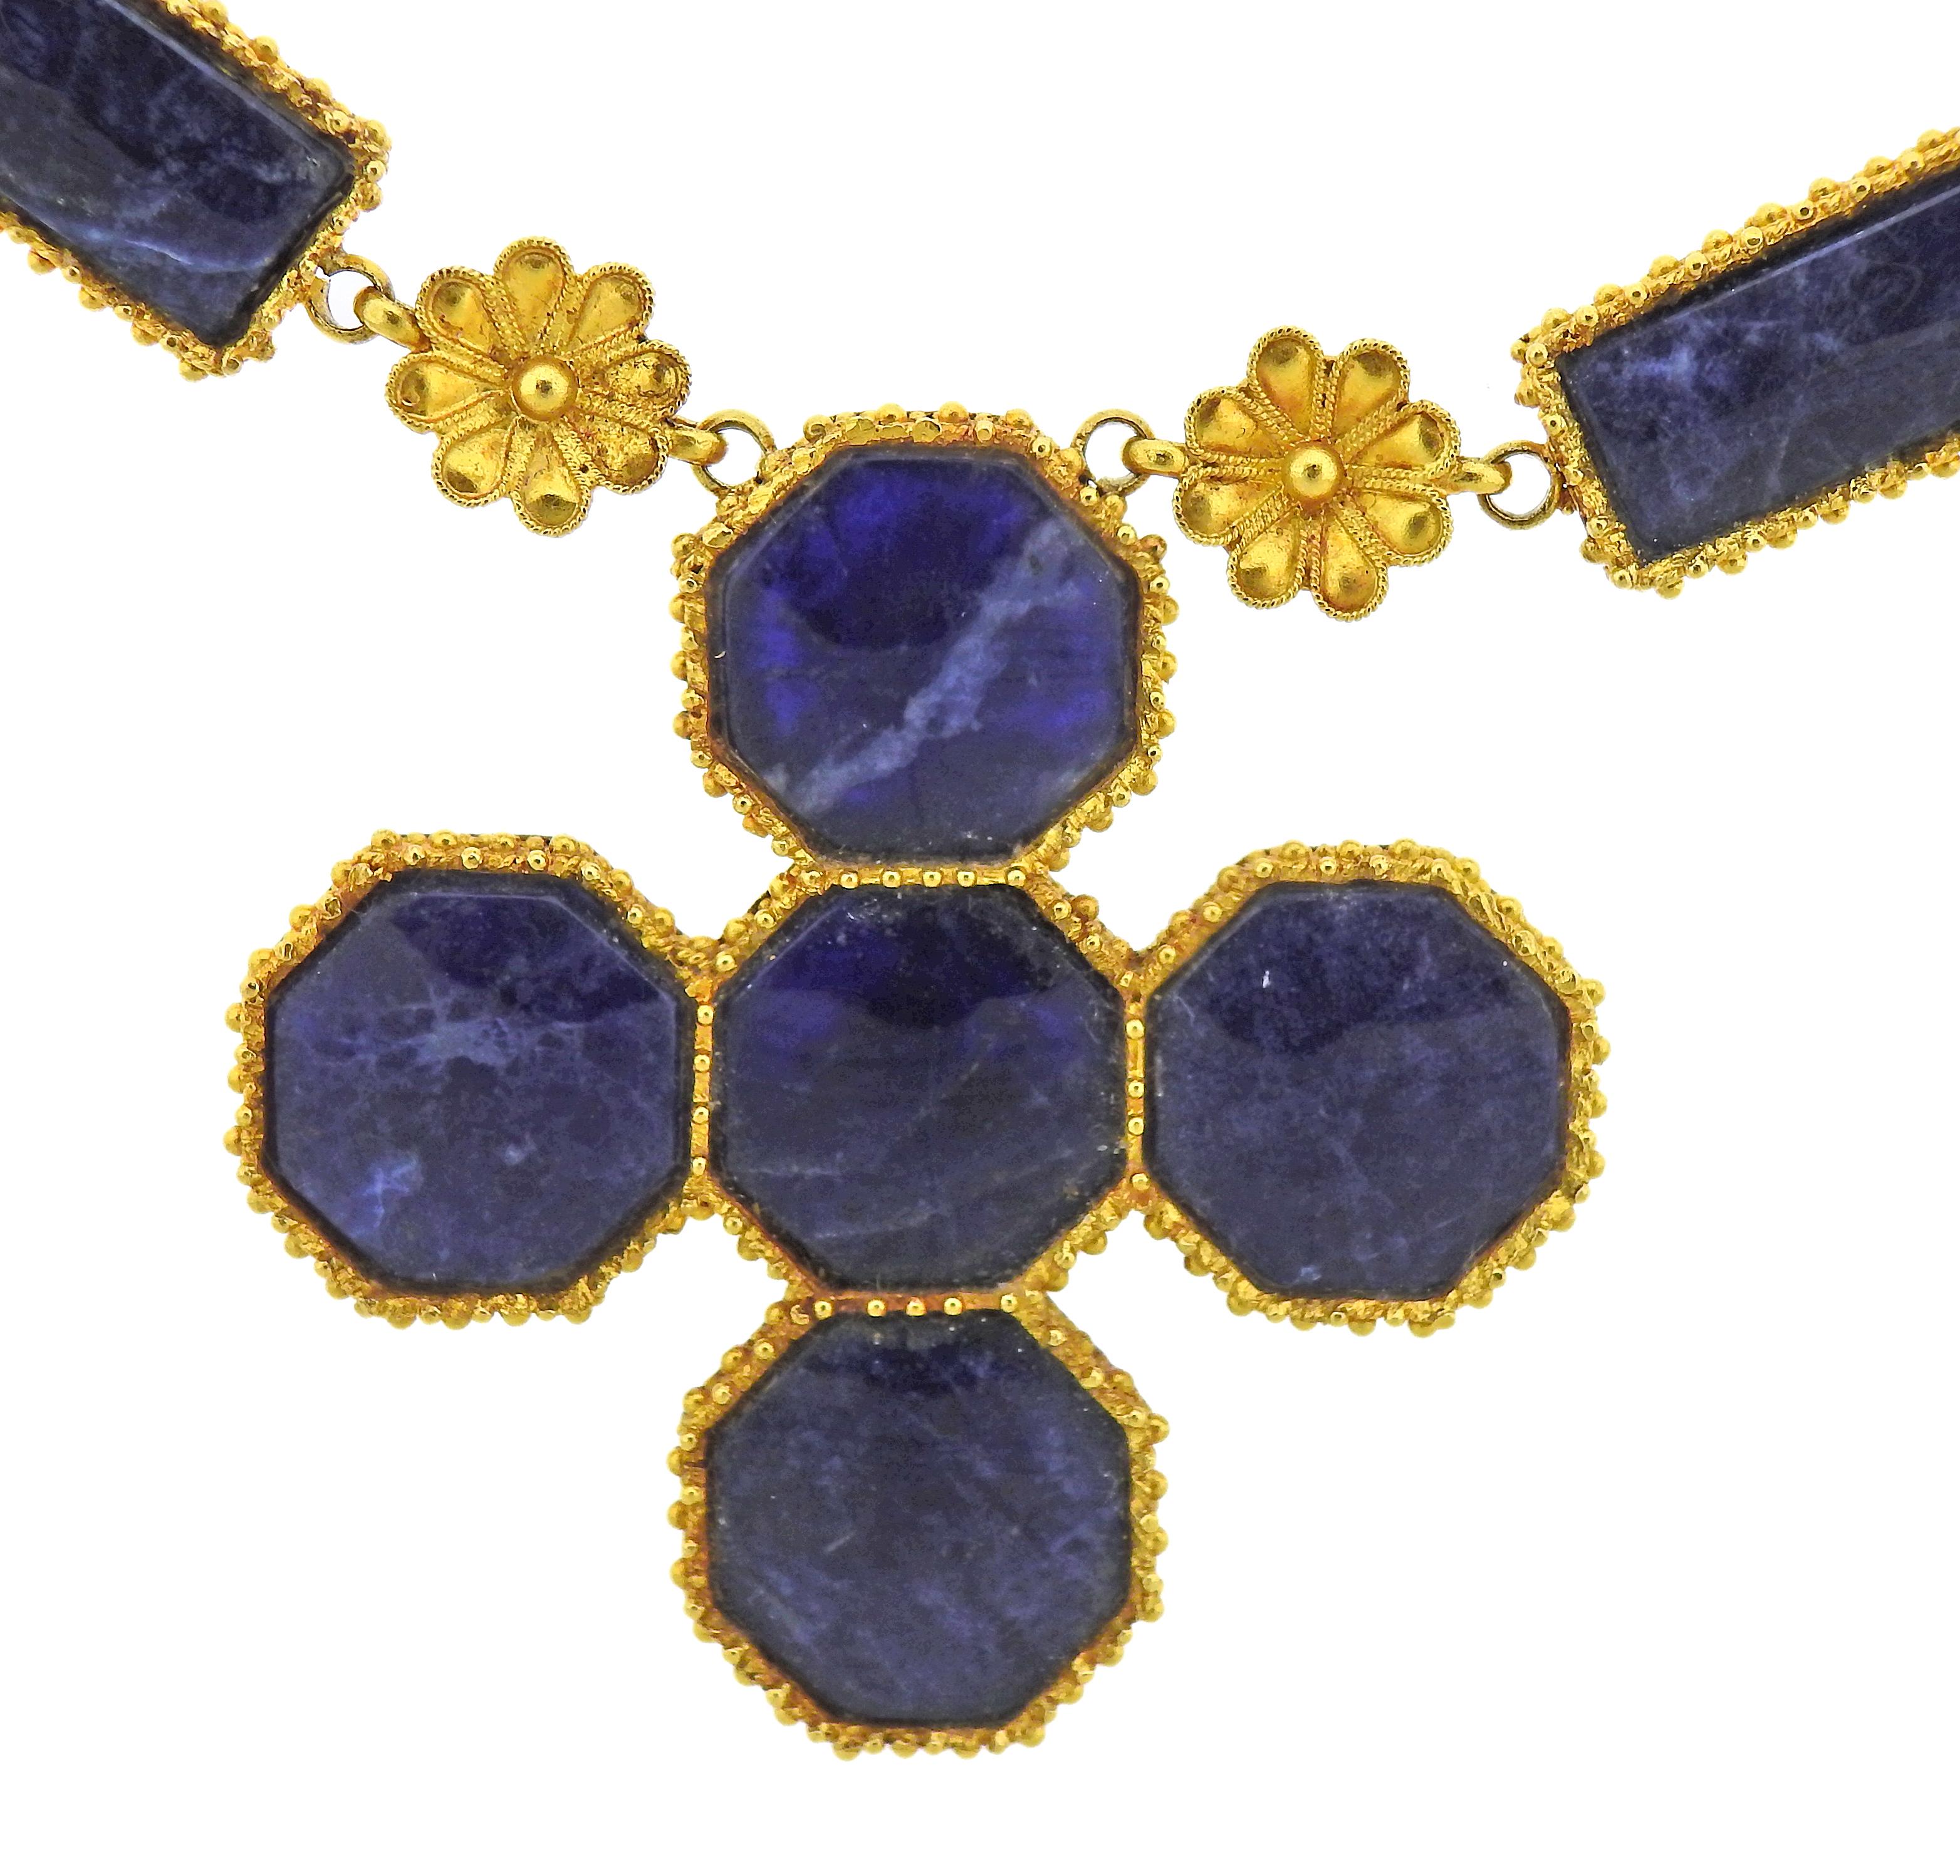 22k yellow gold necklace by Ilias Lalaounis, with cross pendant, set with sodalite stones. Necklace is 26